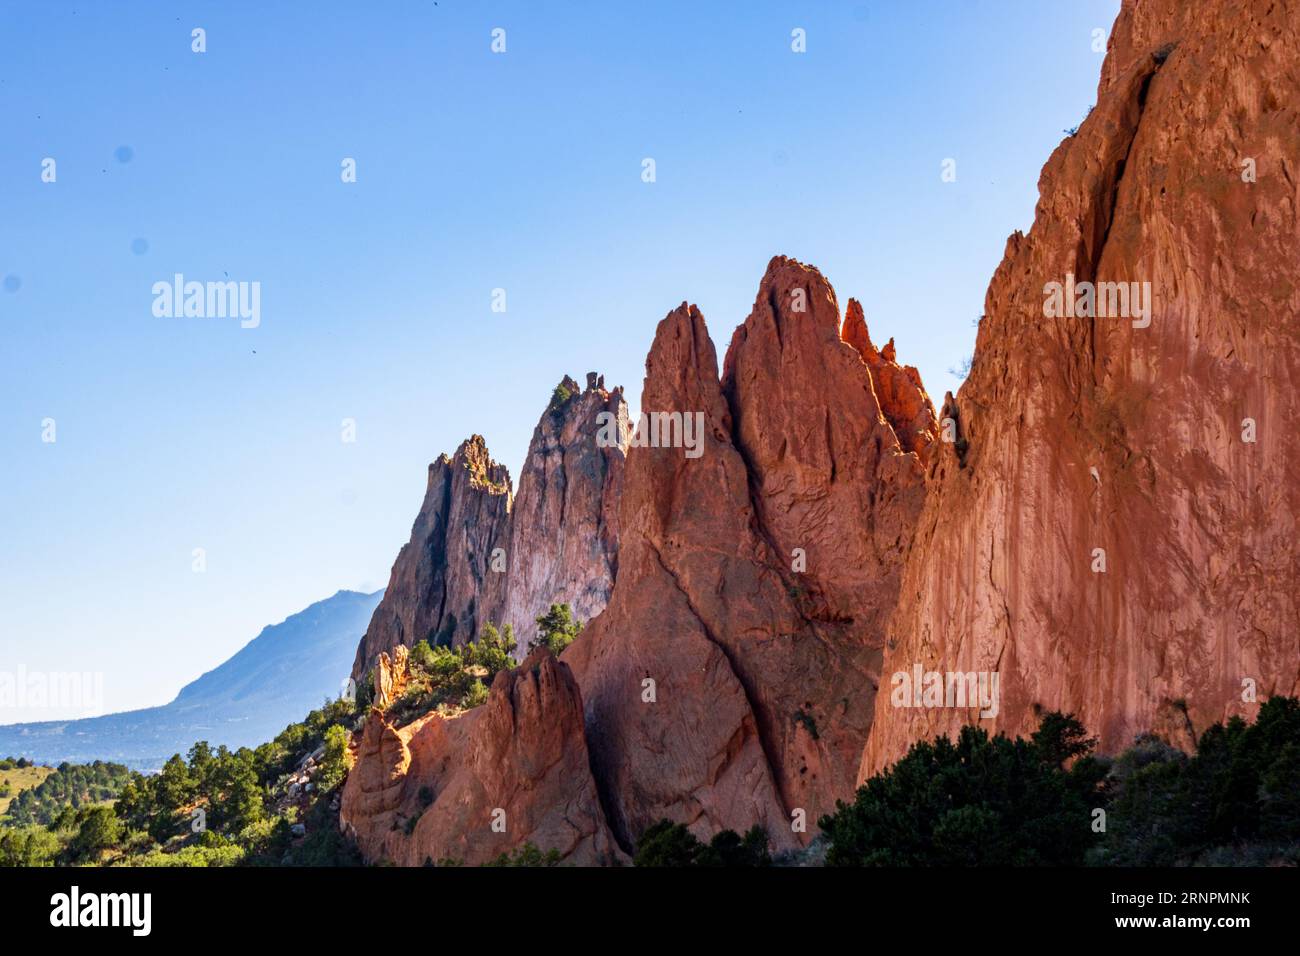 Aerial shot of a stunning desert canyon in Colorado's Garden of the Gods, featuring vibrant red and orange rock formations set against a backdrop of b Stock Photo